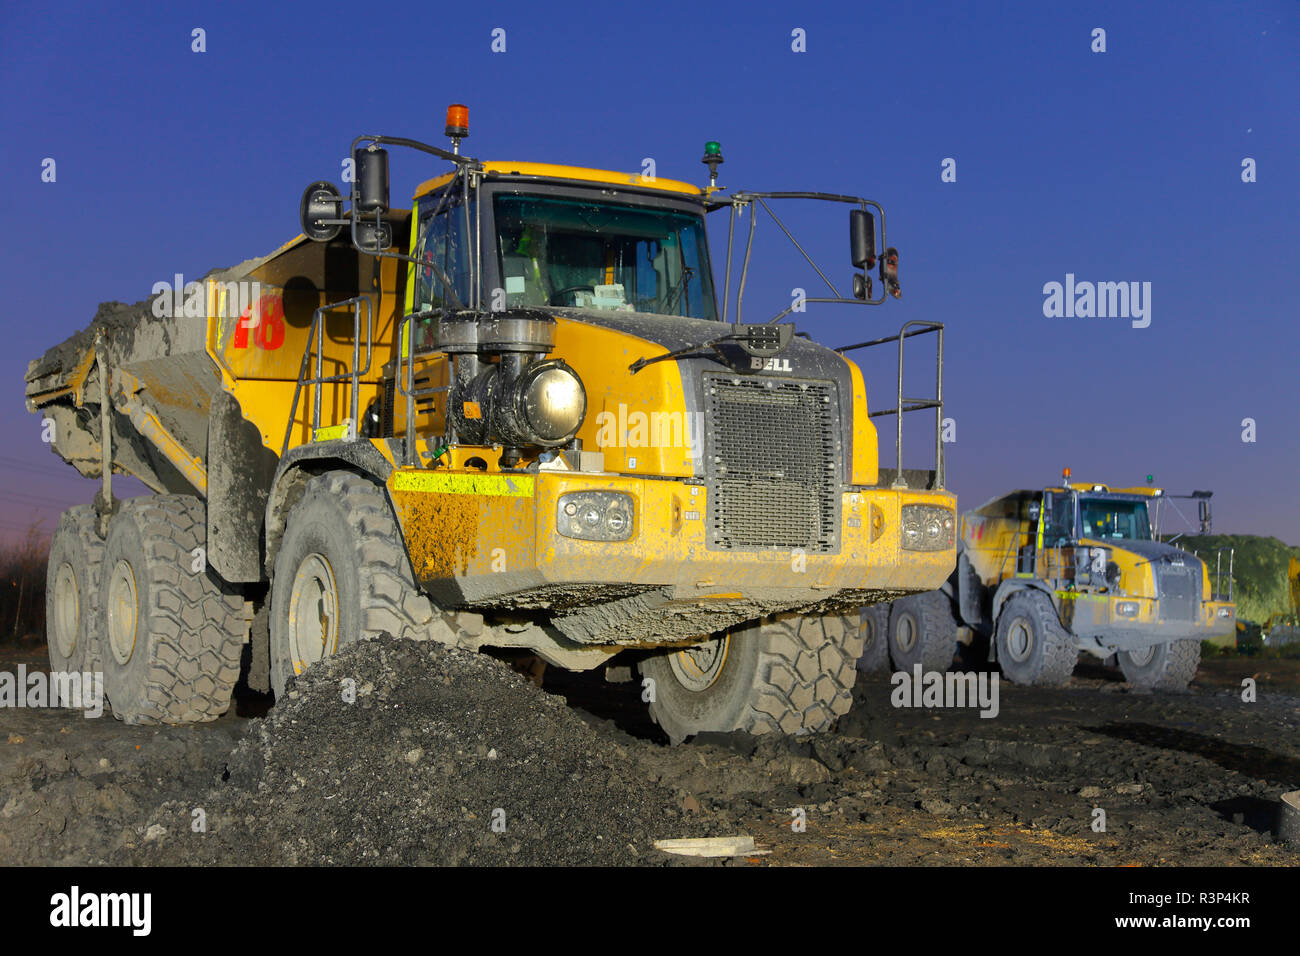 A Bell 40D articulated dump truck at work on Recycoal Coal Recycling Plant in Rossington,Doncaster which has now been demolished to build new houses. Stock Photo